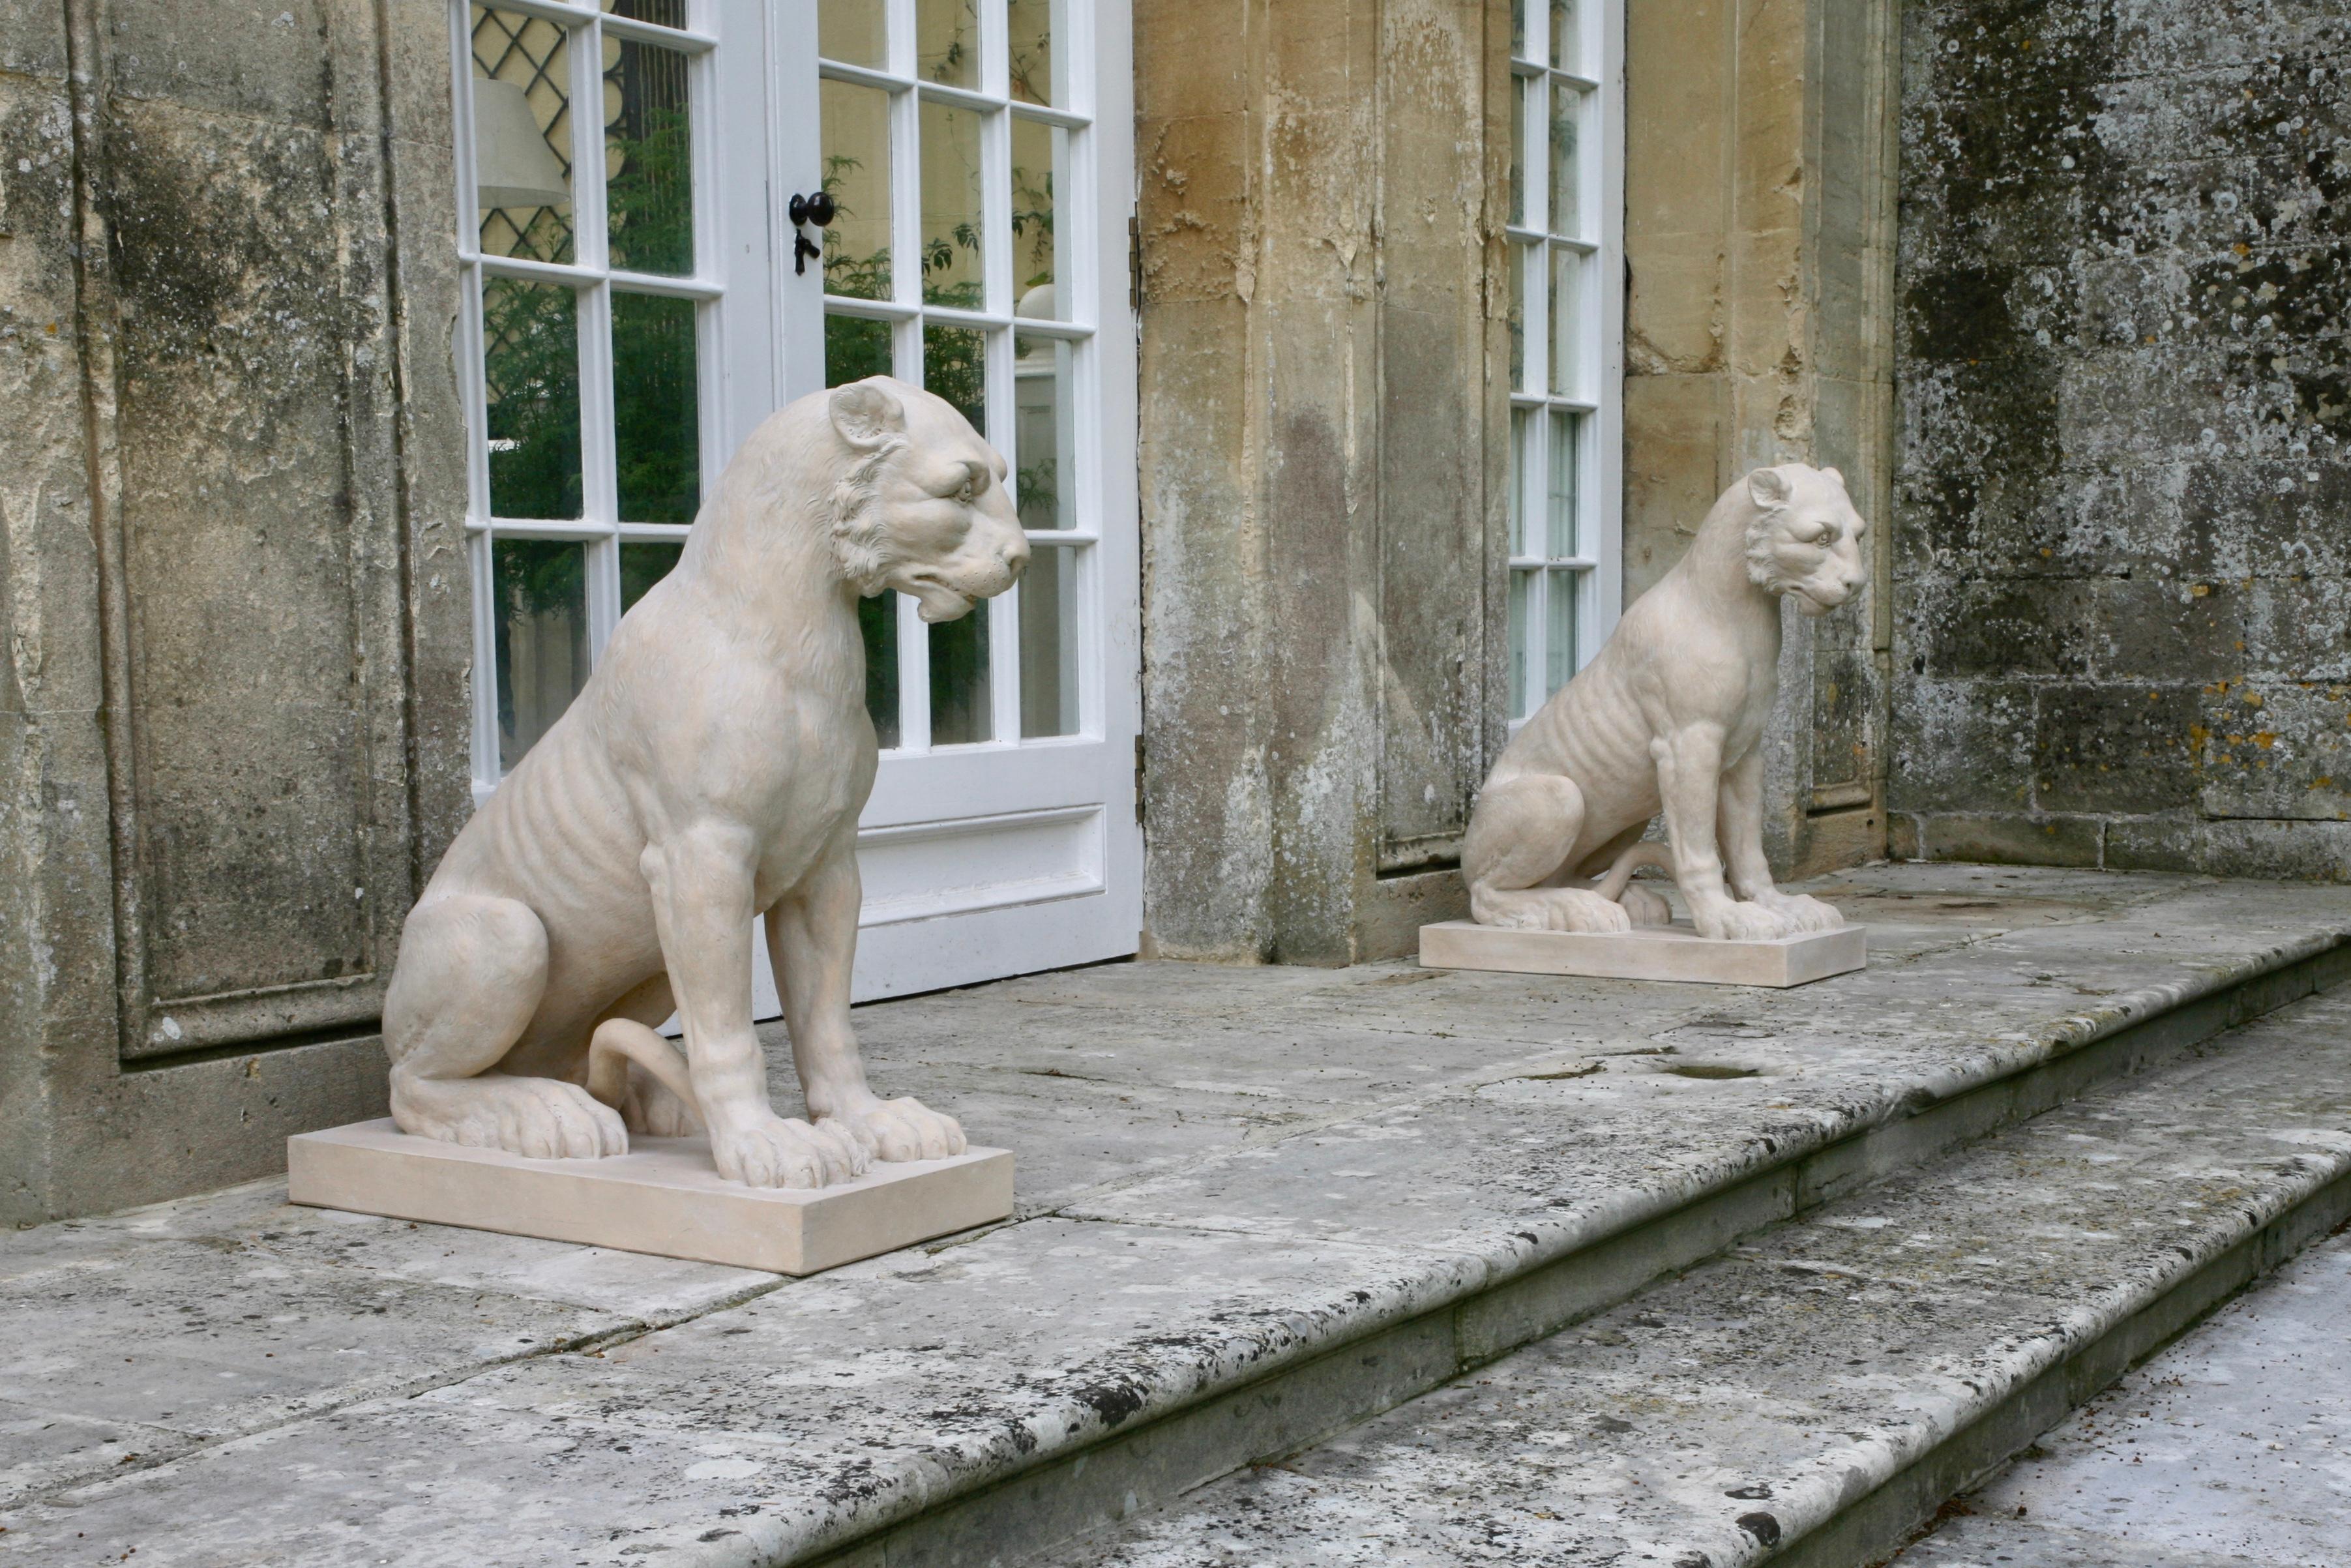 Tiger or possibly a lioness, modelled after an 18th century original by 'Coade' Manufactory.

Shown seated, looking to sinster, on a modern rectangular base.

In Chinese mythology, the tiger represents the greatest of earthly power and protection